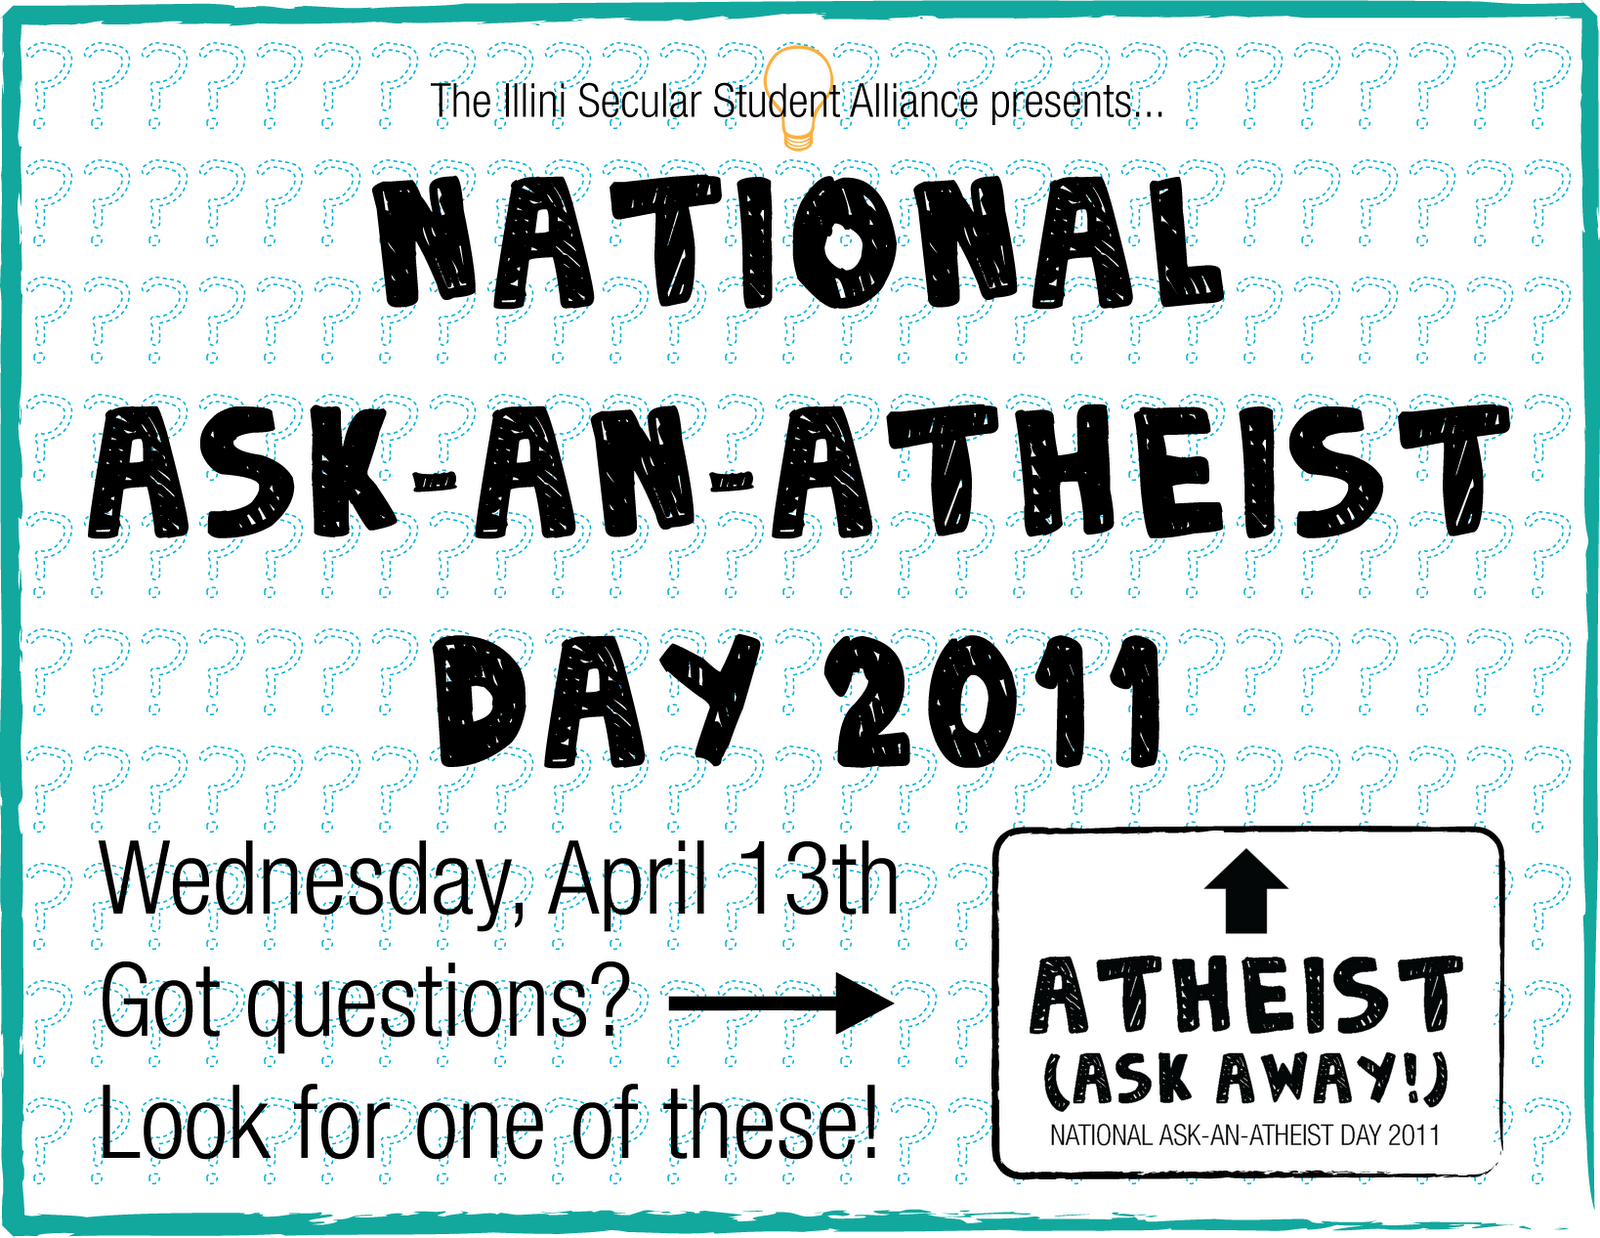 More Resources for National Ask An Atheist Day